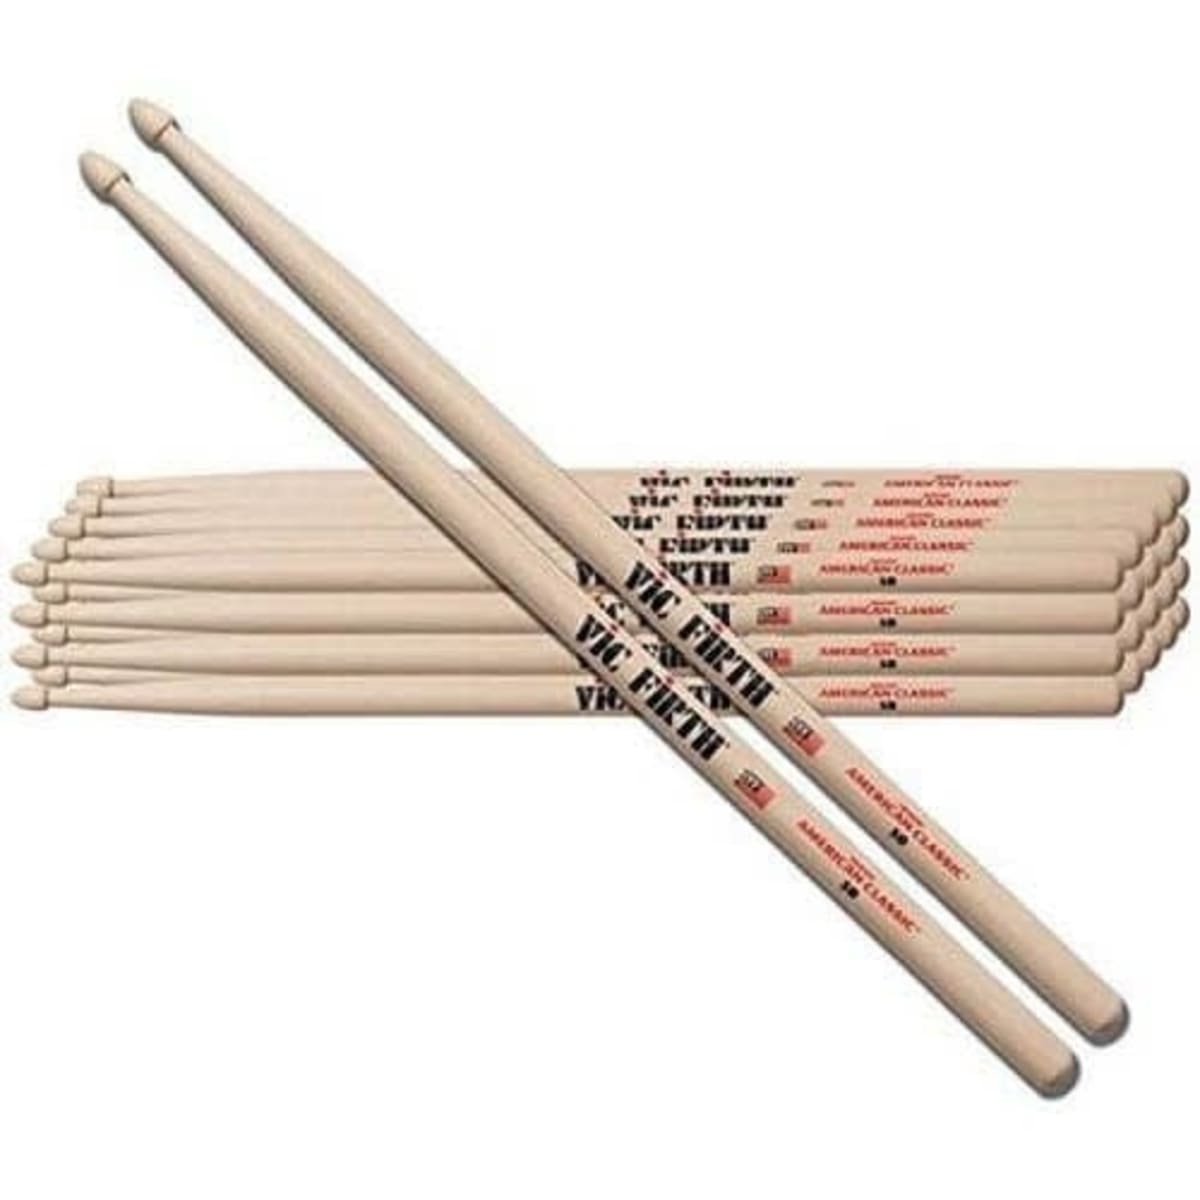 American　Tip　Pairs　Vic　Konga　Online　Sticks　Wood　Shopping　Firth　Drum　5a　Classic　Hickory　12